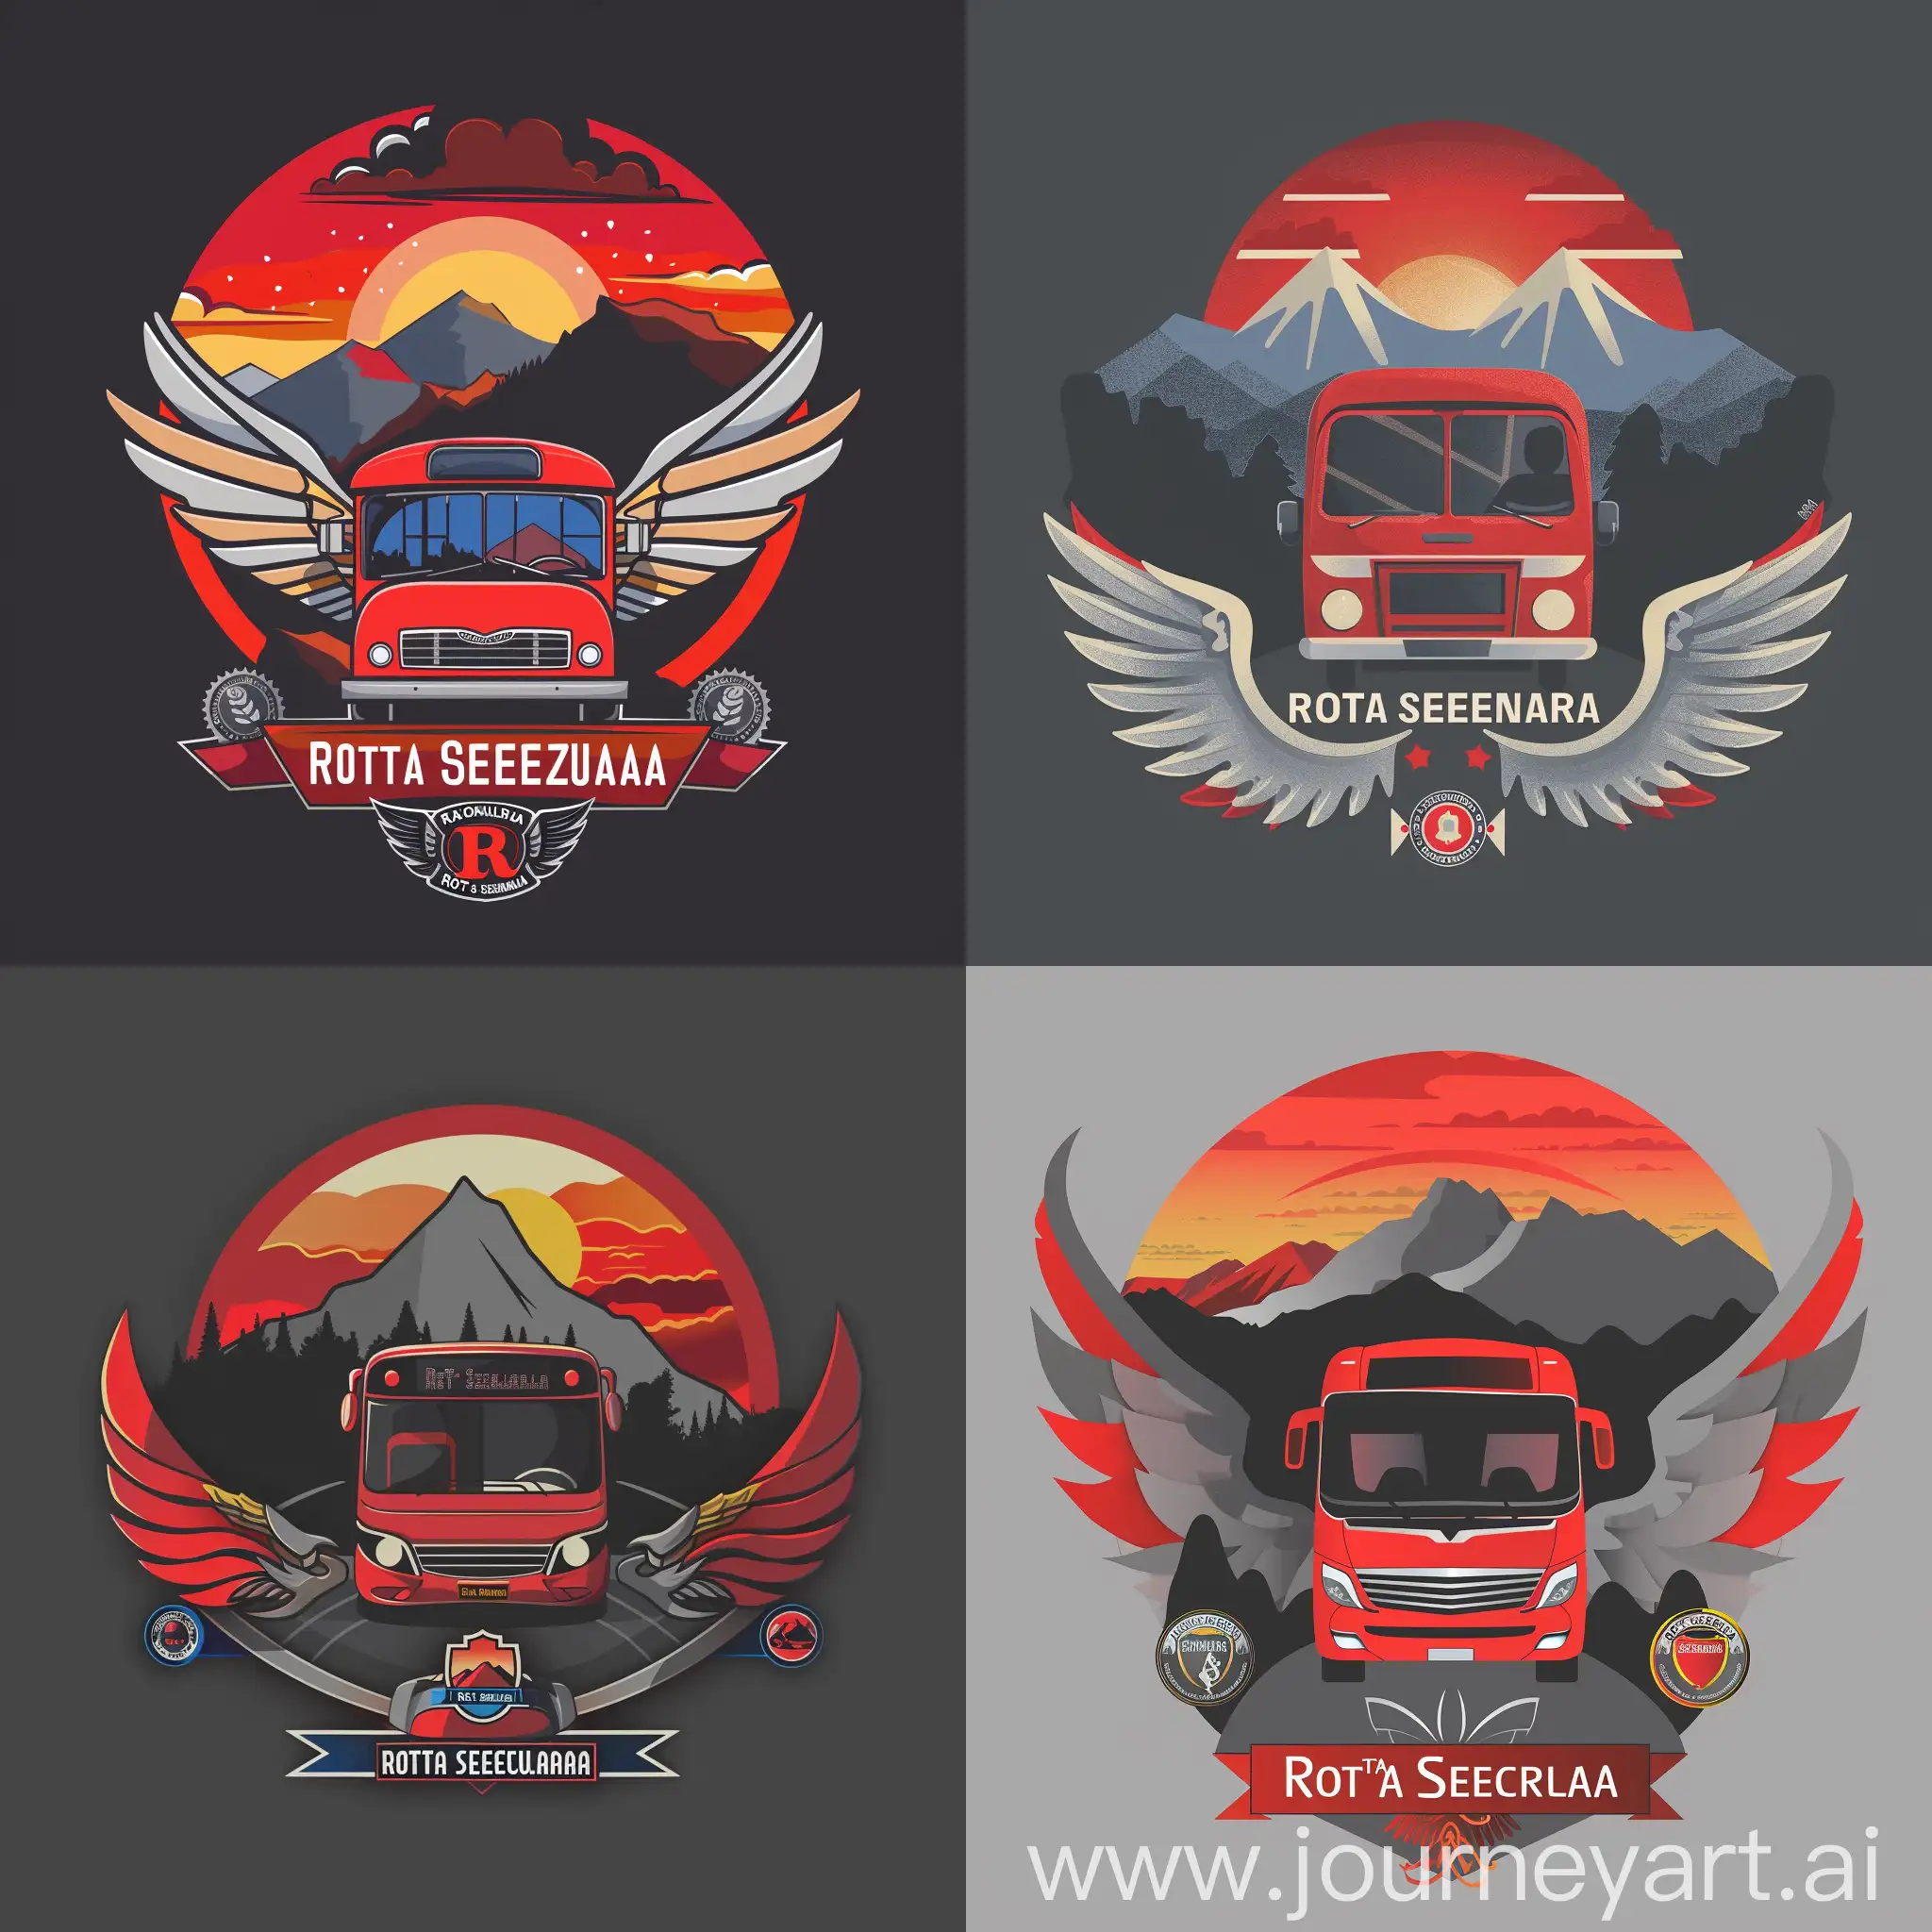 a logo, beautiful red bus, going forward, with mountains and sunset behind, "Rota Segura" text below, use badges, wings, red and gray as main colours